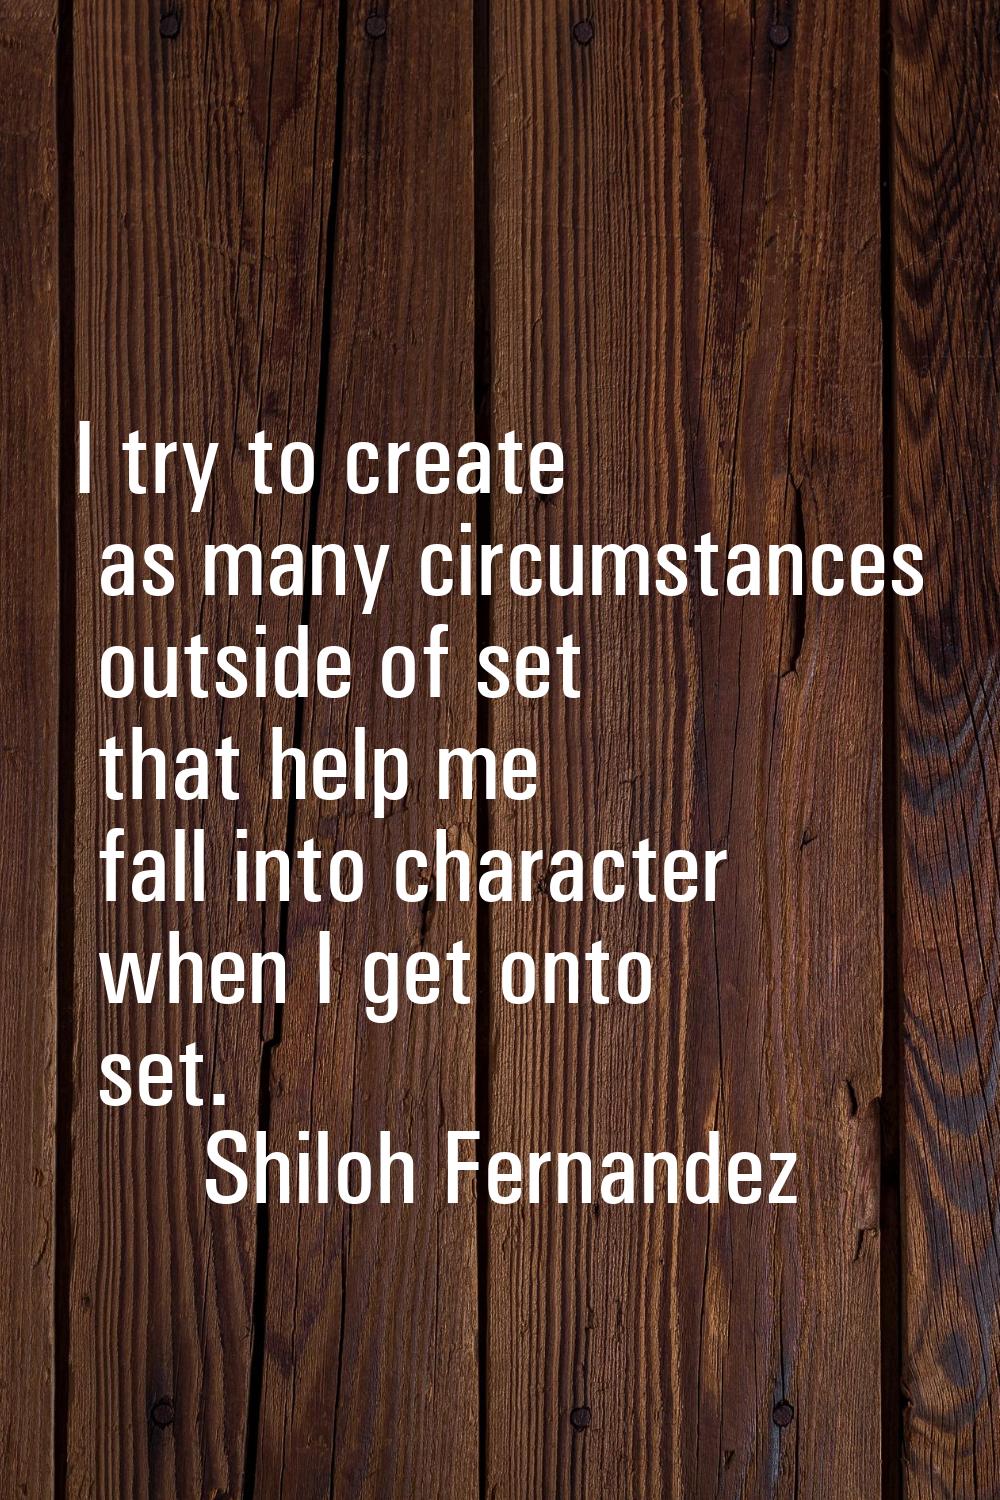 I try to create as many circumstances outside of set that help me fall into character when I get on